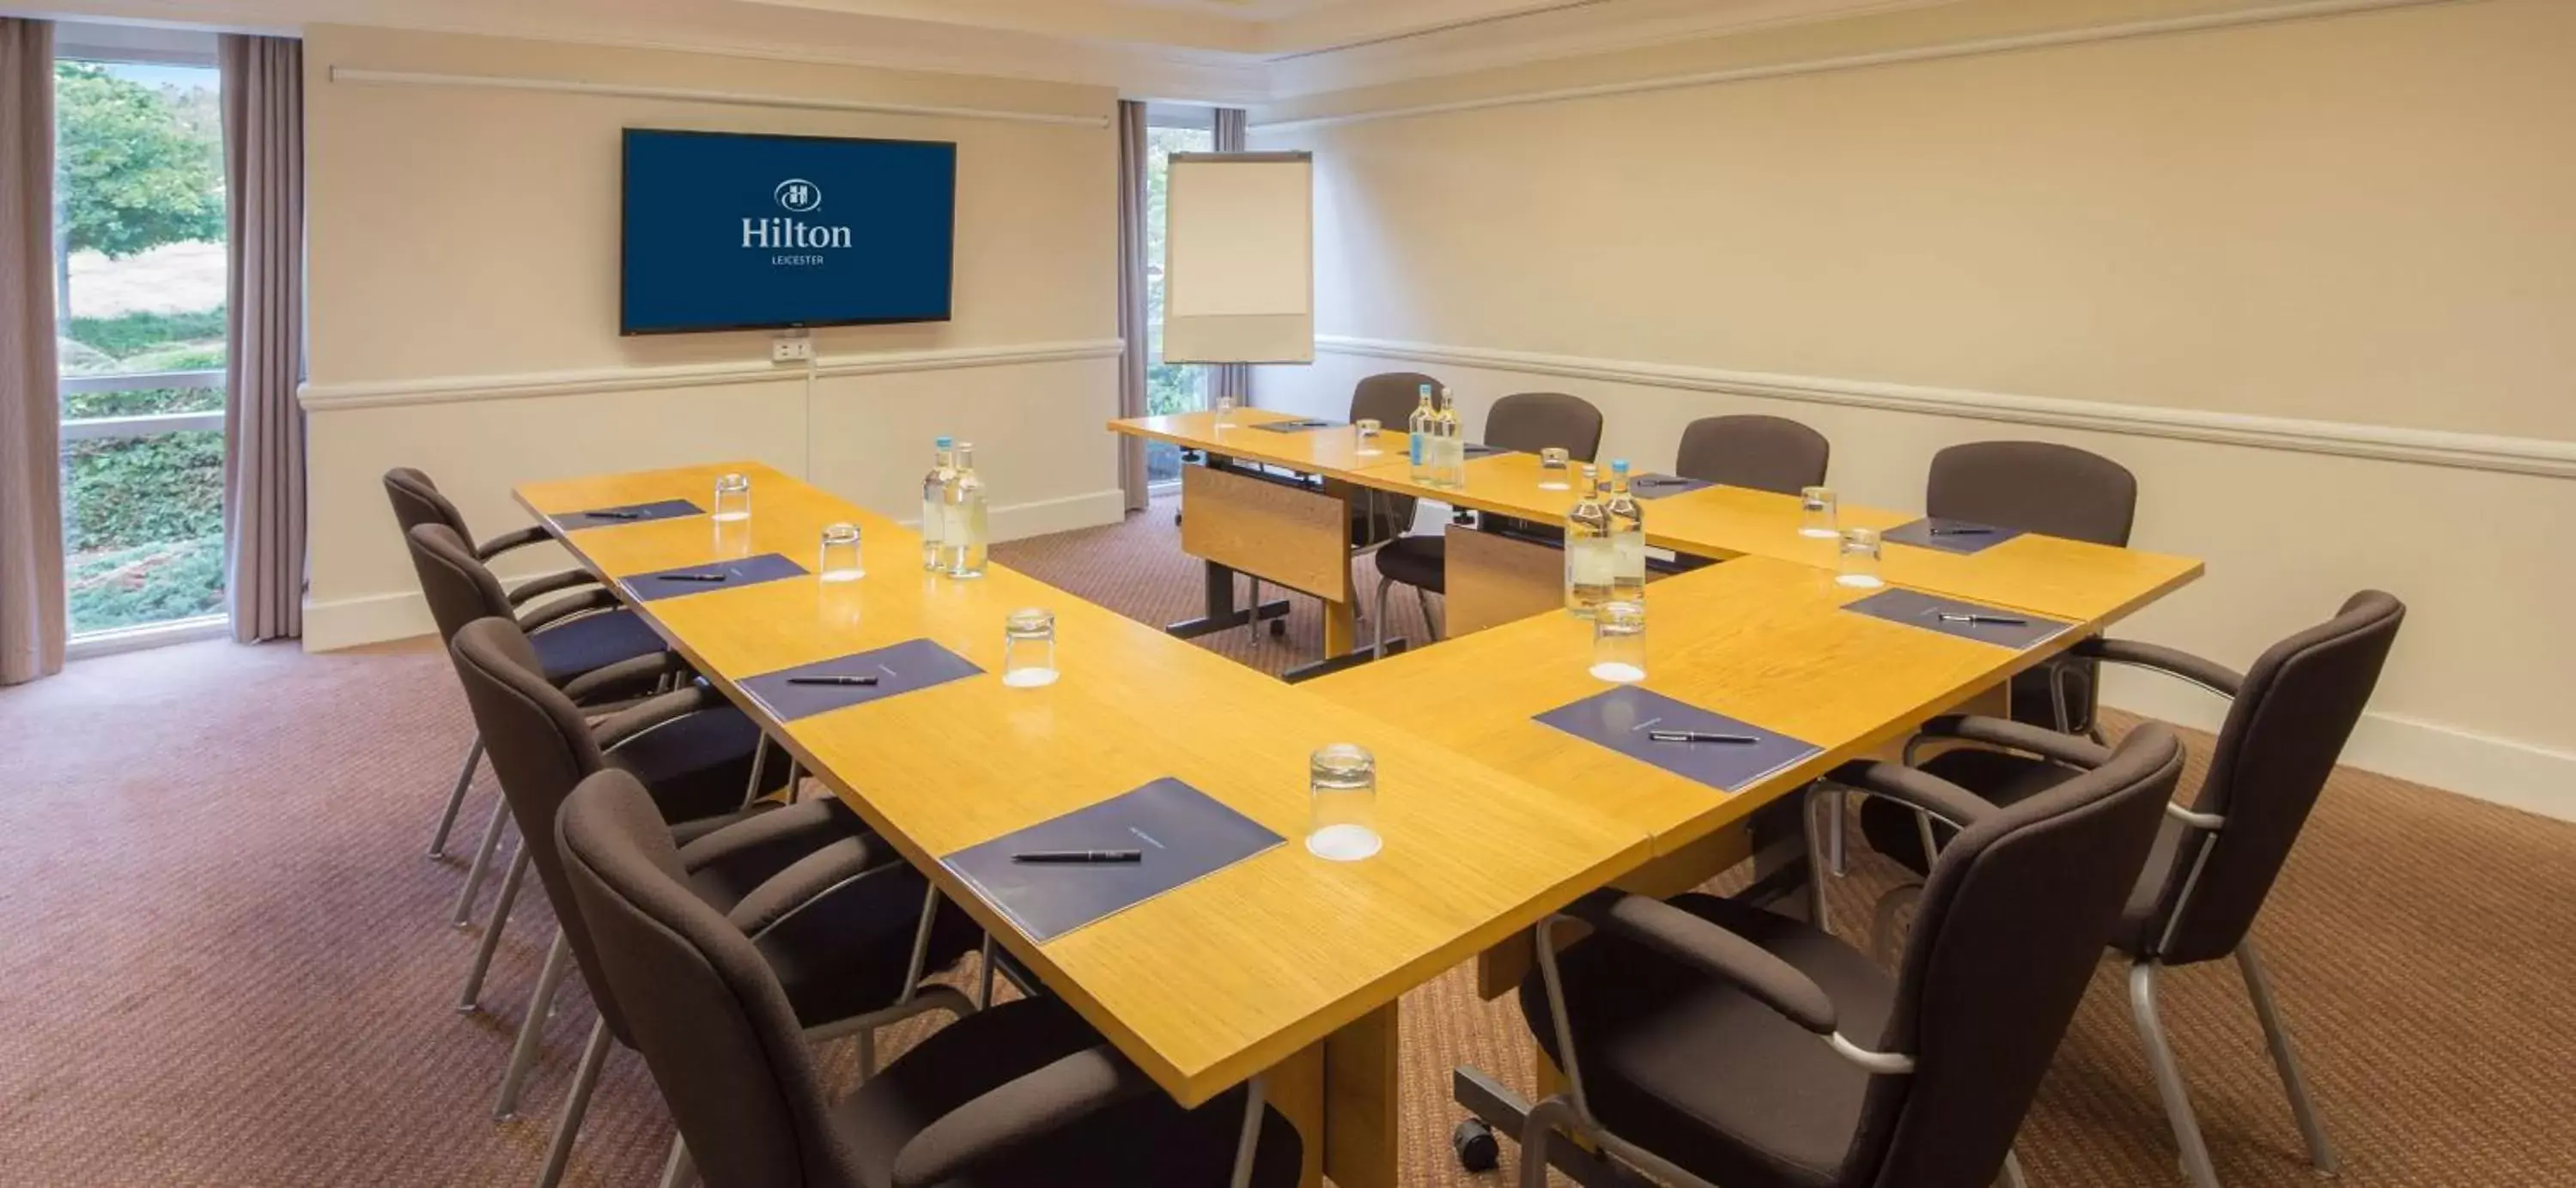 Meeting/conference room in Hilton Leicester Hotel